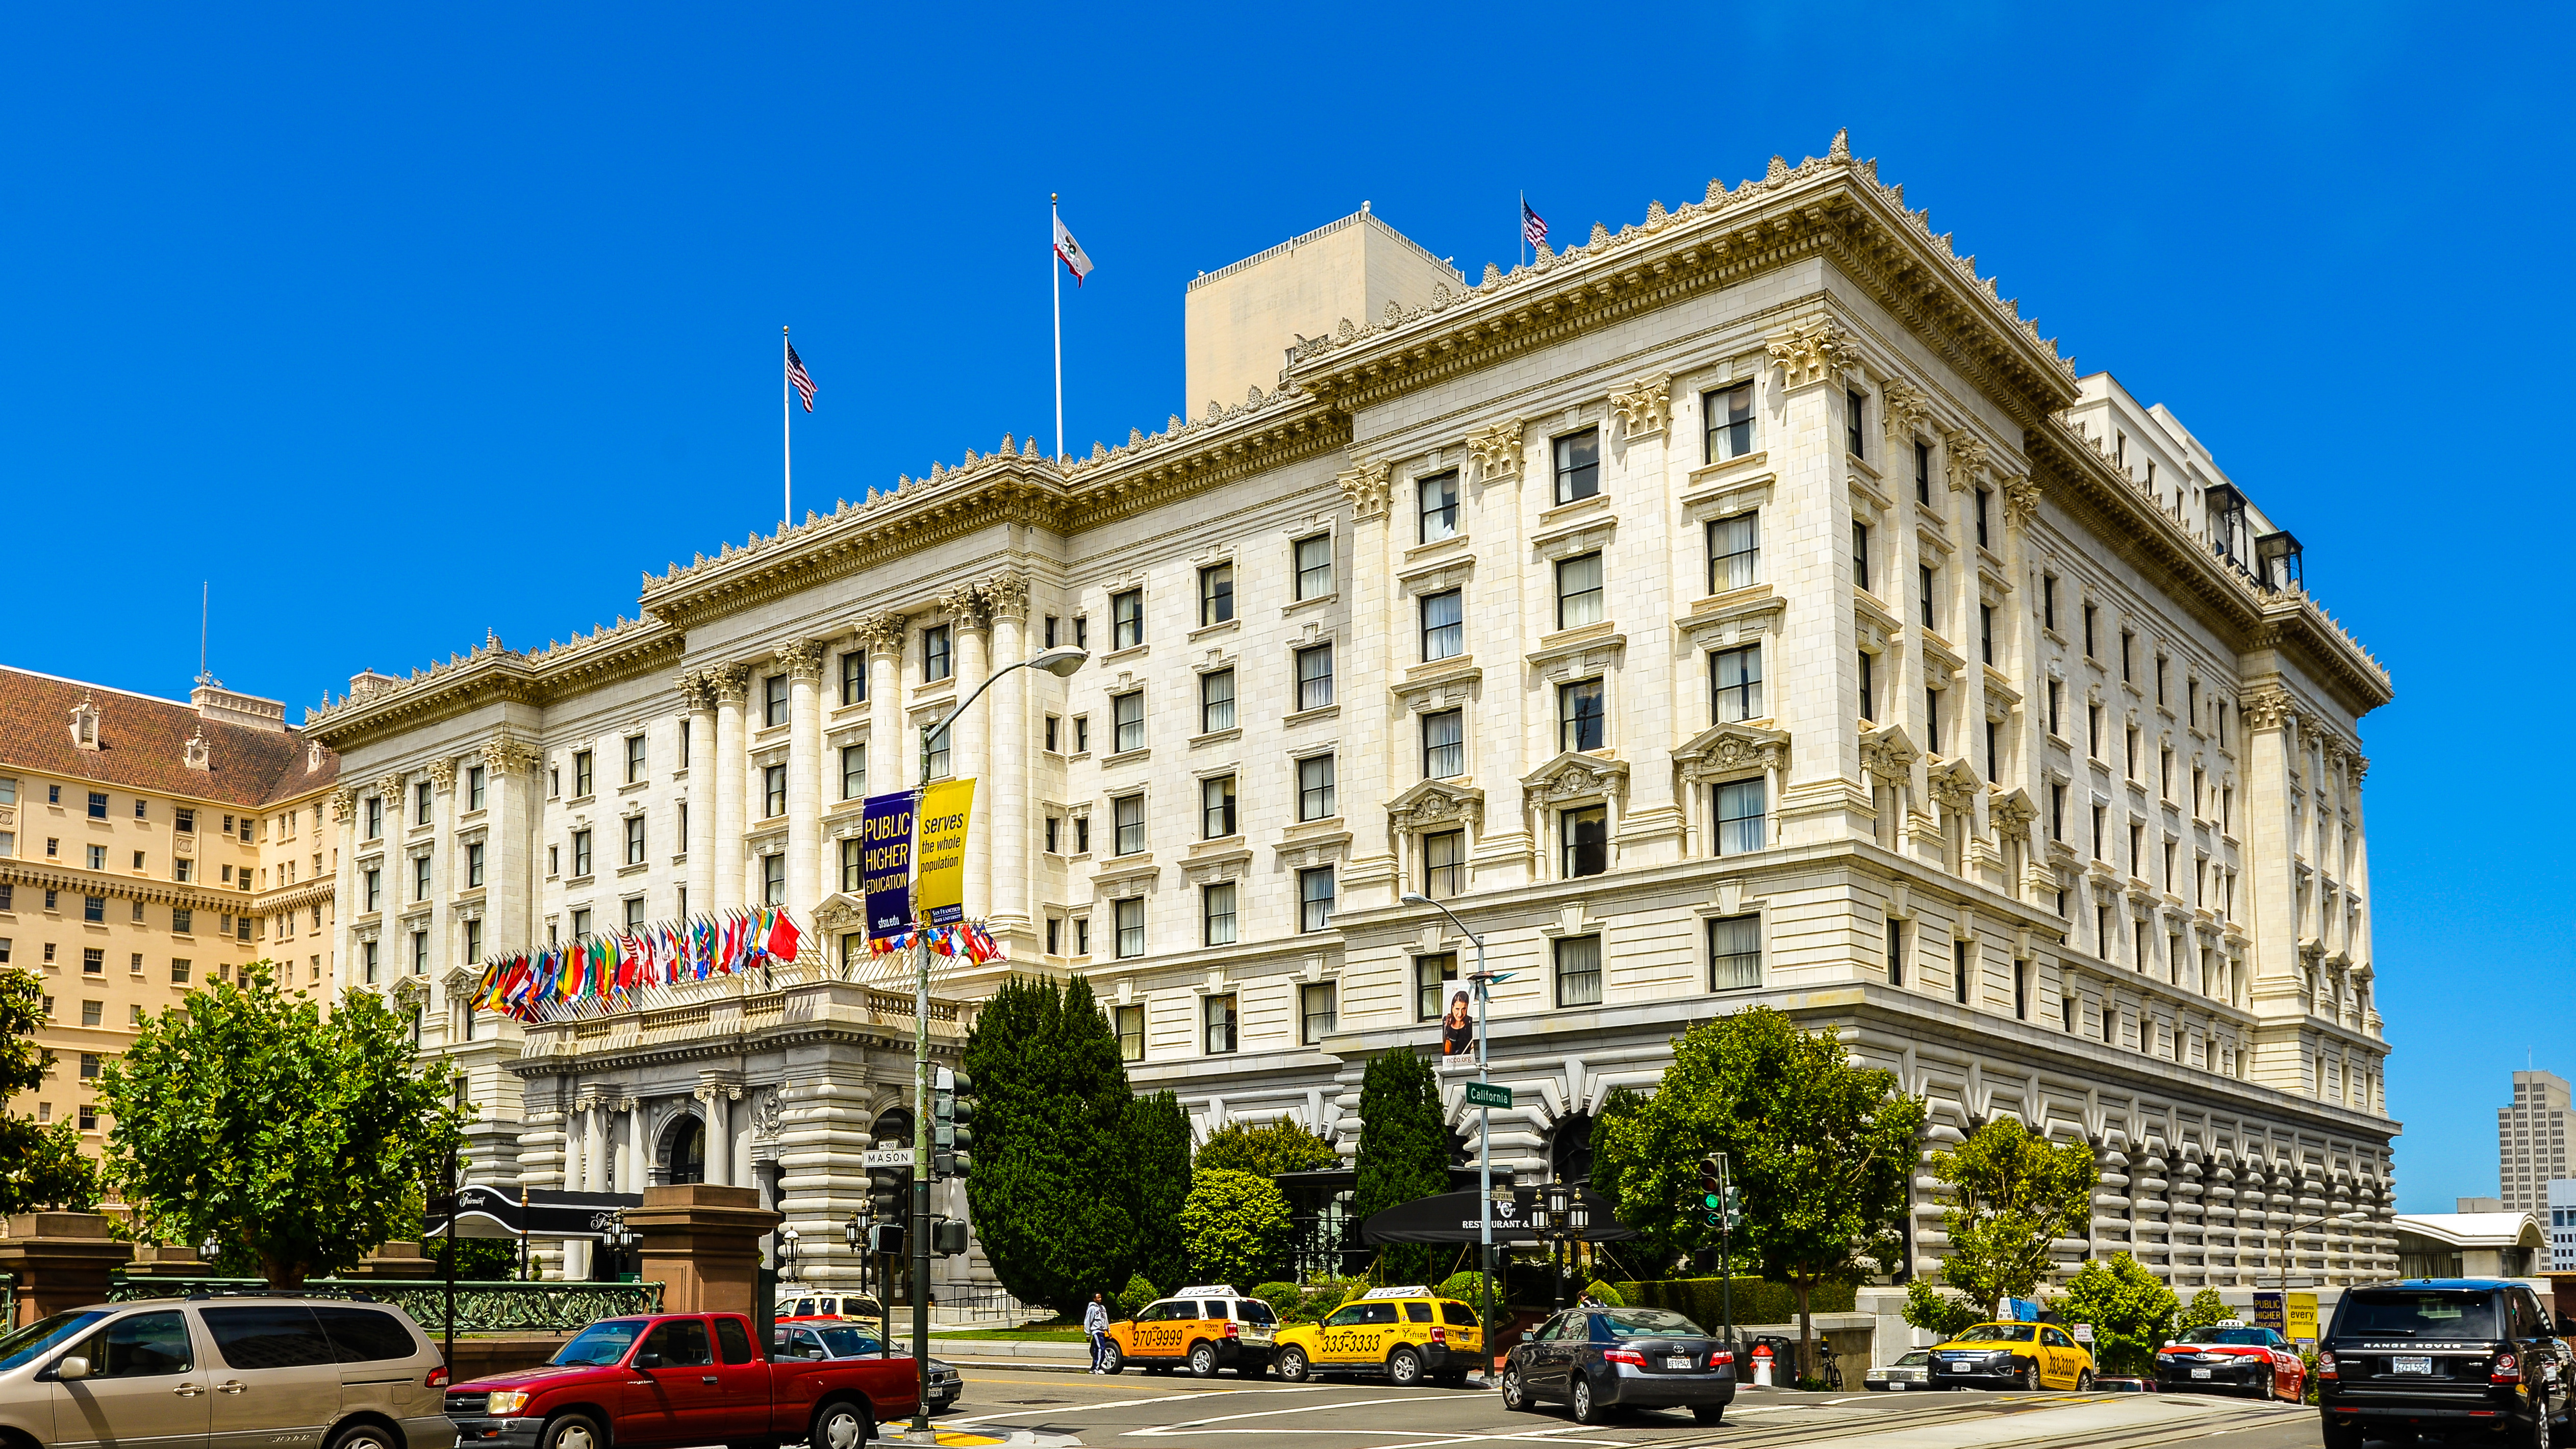 The exterior of a hotel in San Francisco. The facade is white with multiple windows and trees in front.